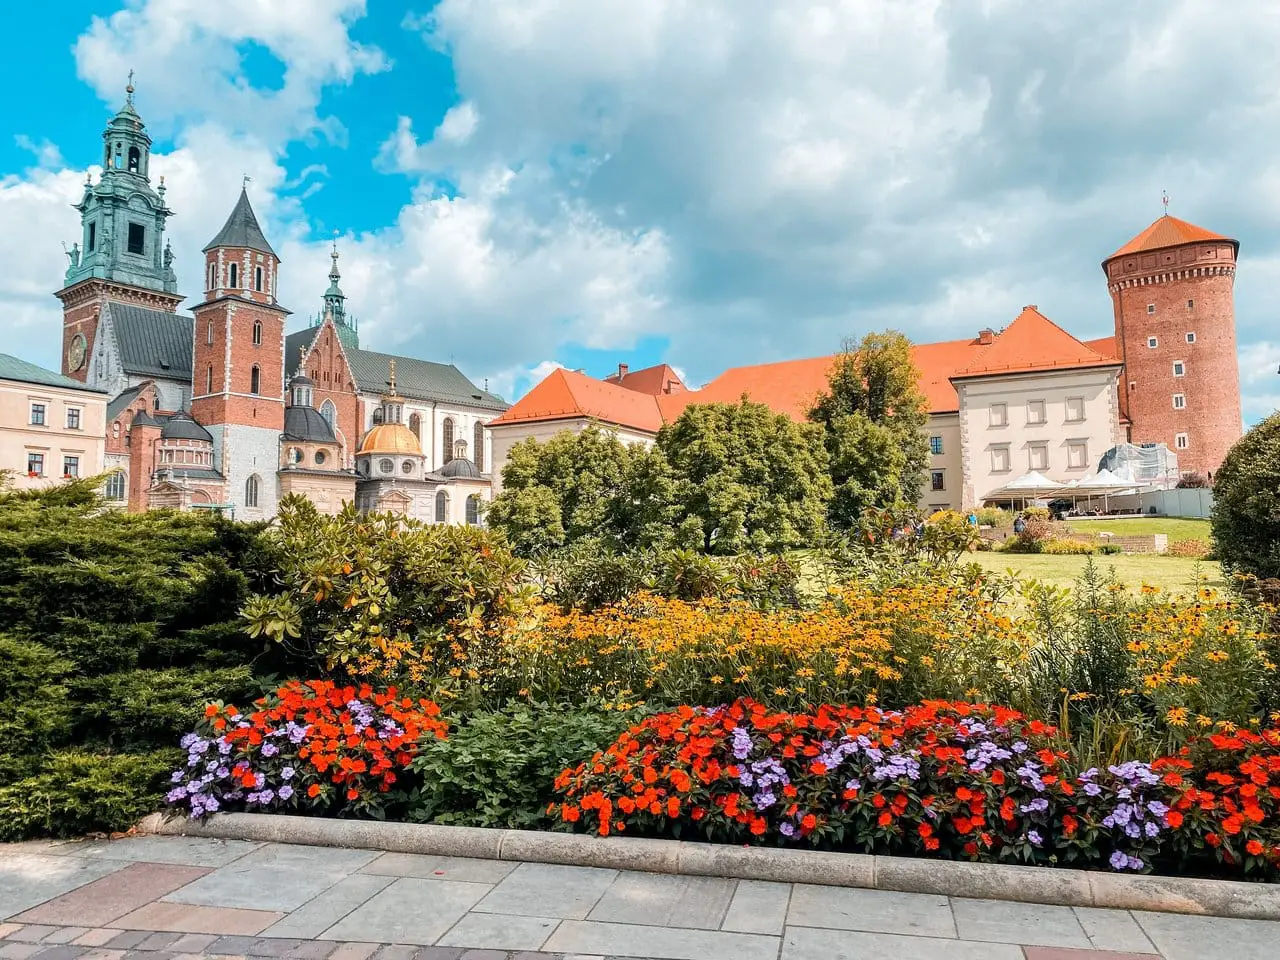 Wawel Royal Castle is one of the best places to visit during a weekend in Krakow